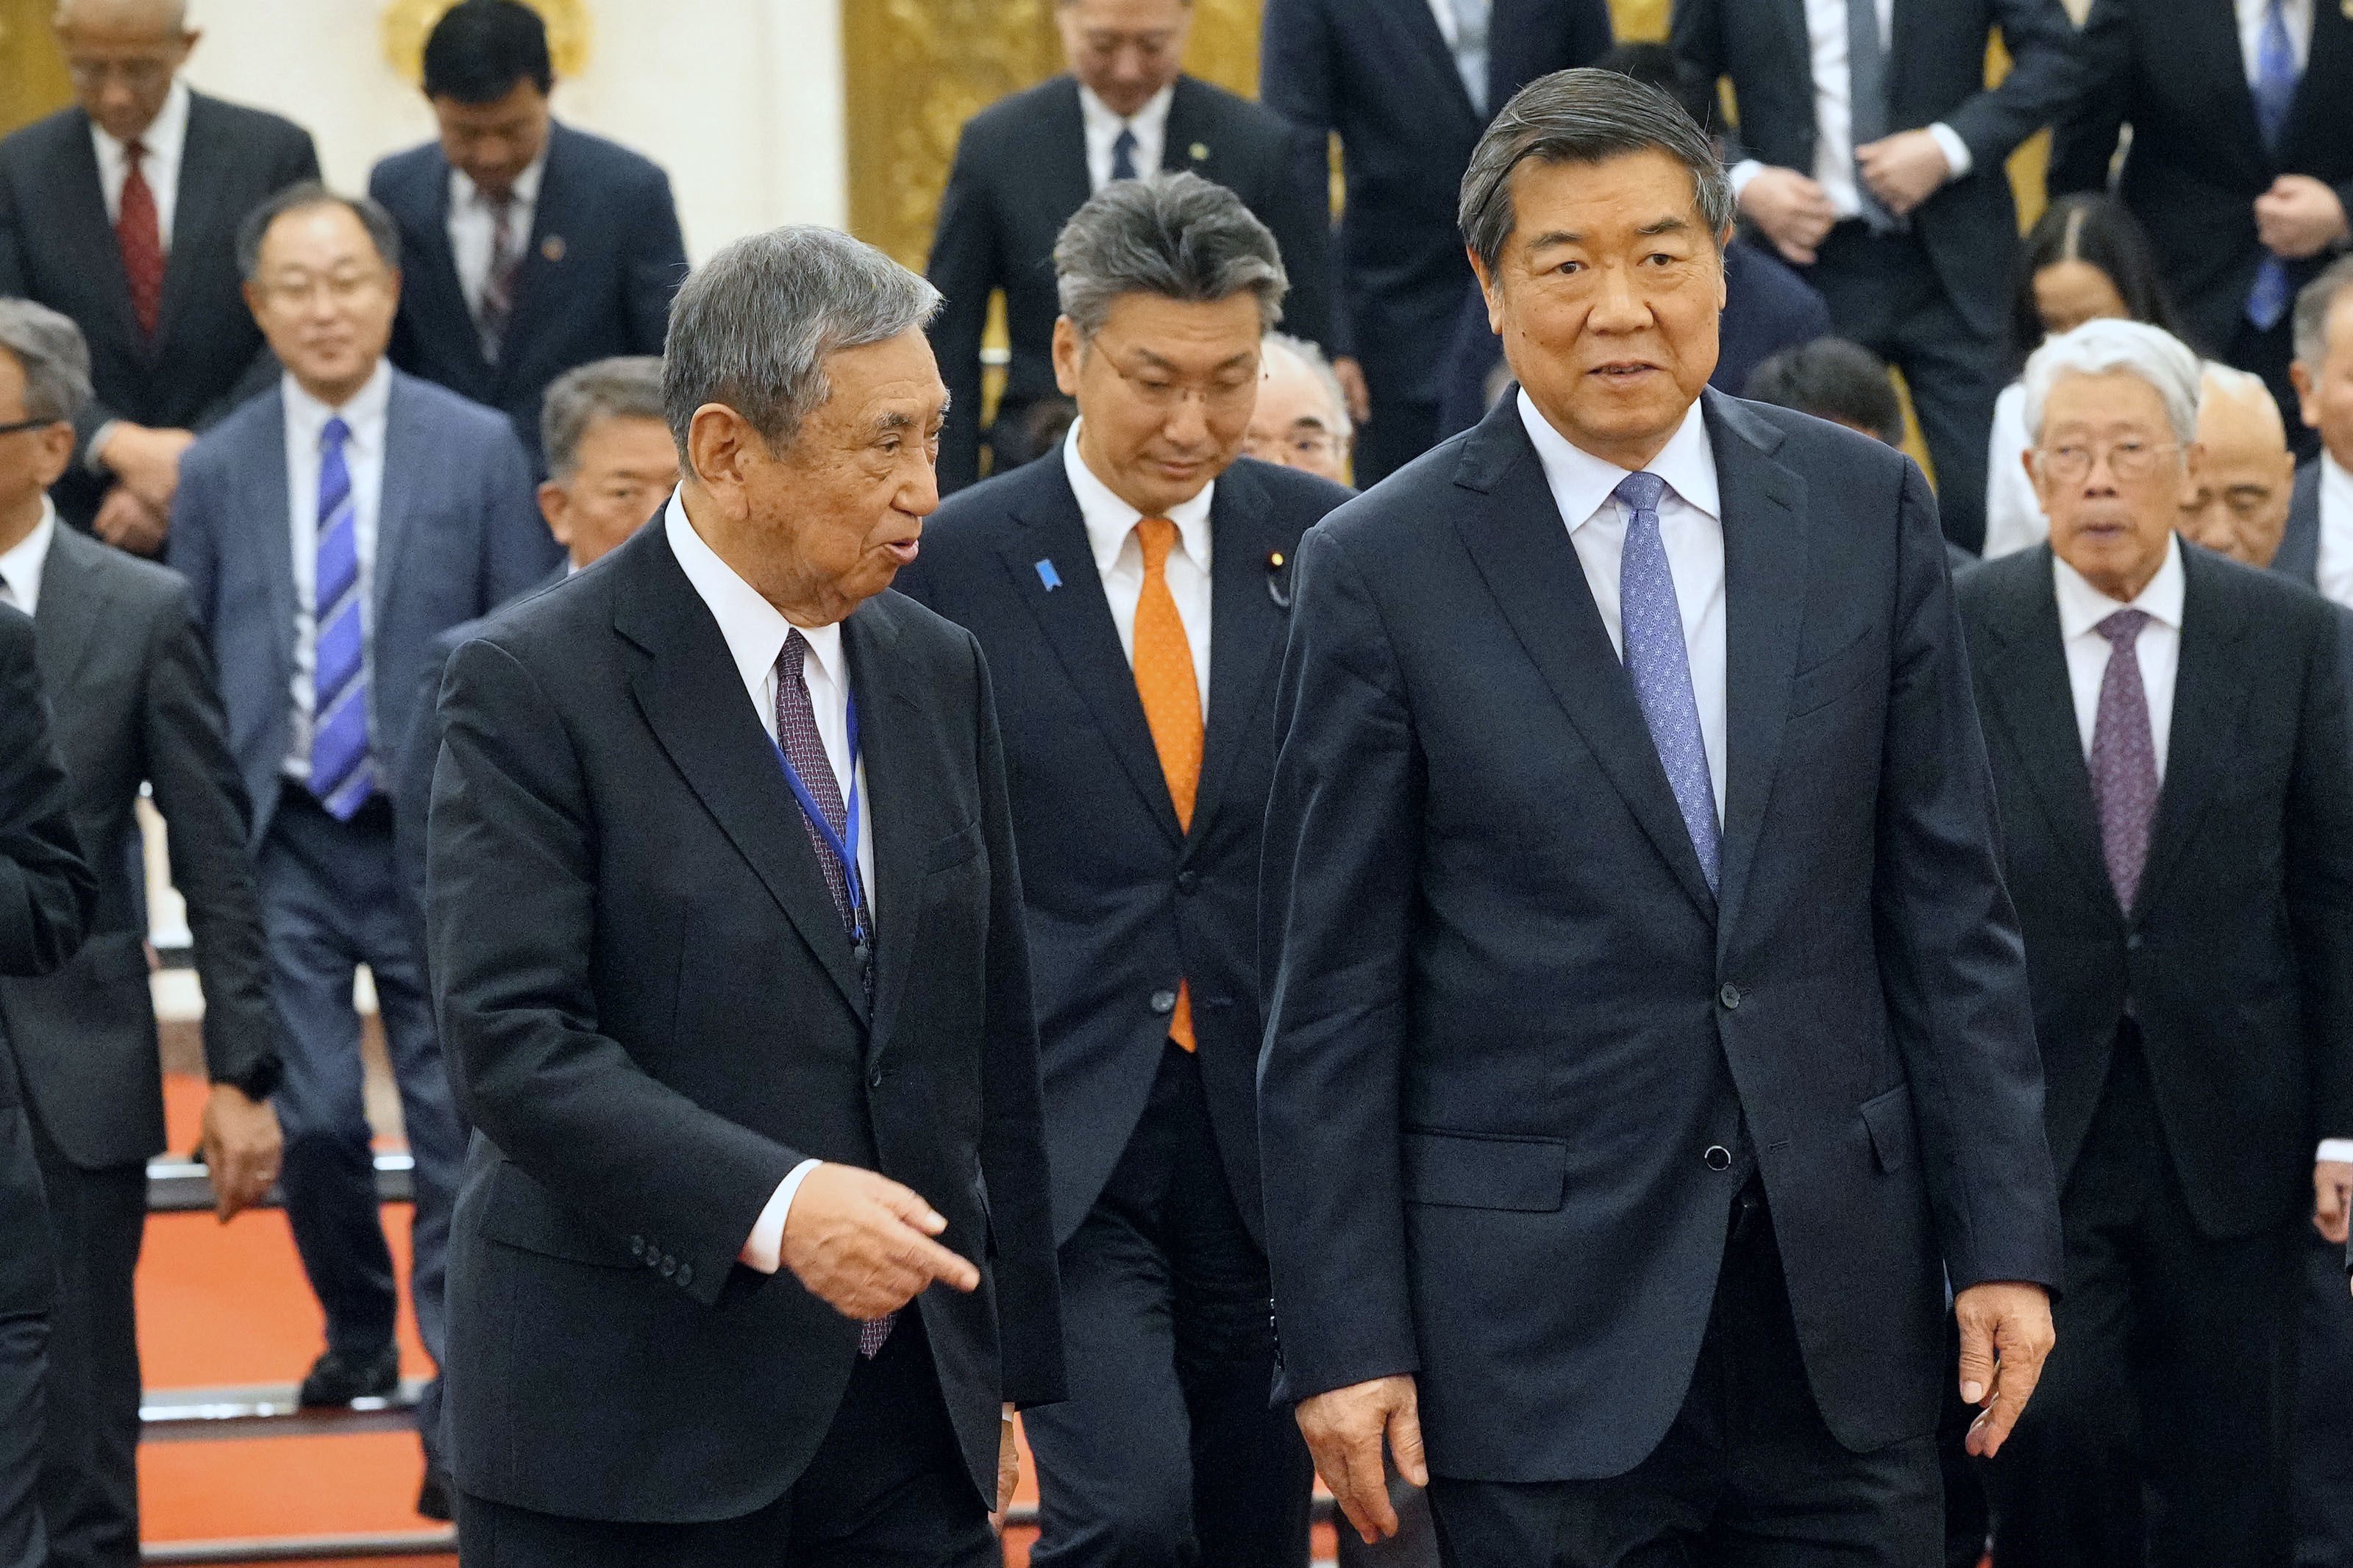 Former speaker of Japan’s House of Representatives Yohei Kono, front left, and Chinese vice-premier He Lifeng, front right, walk to their meeting in Beijing. Photo: Kyodo